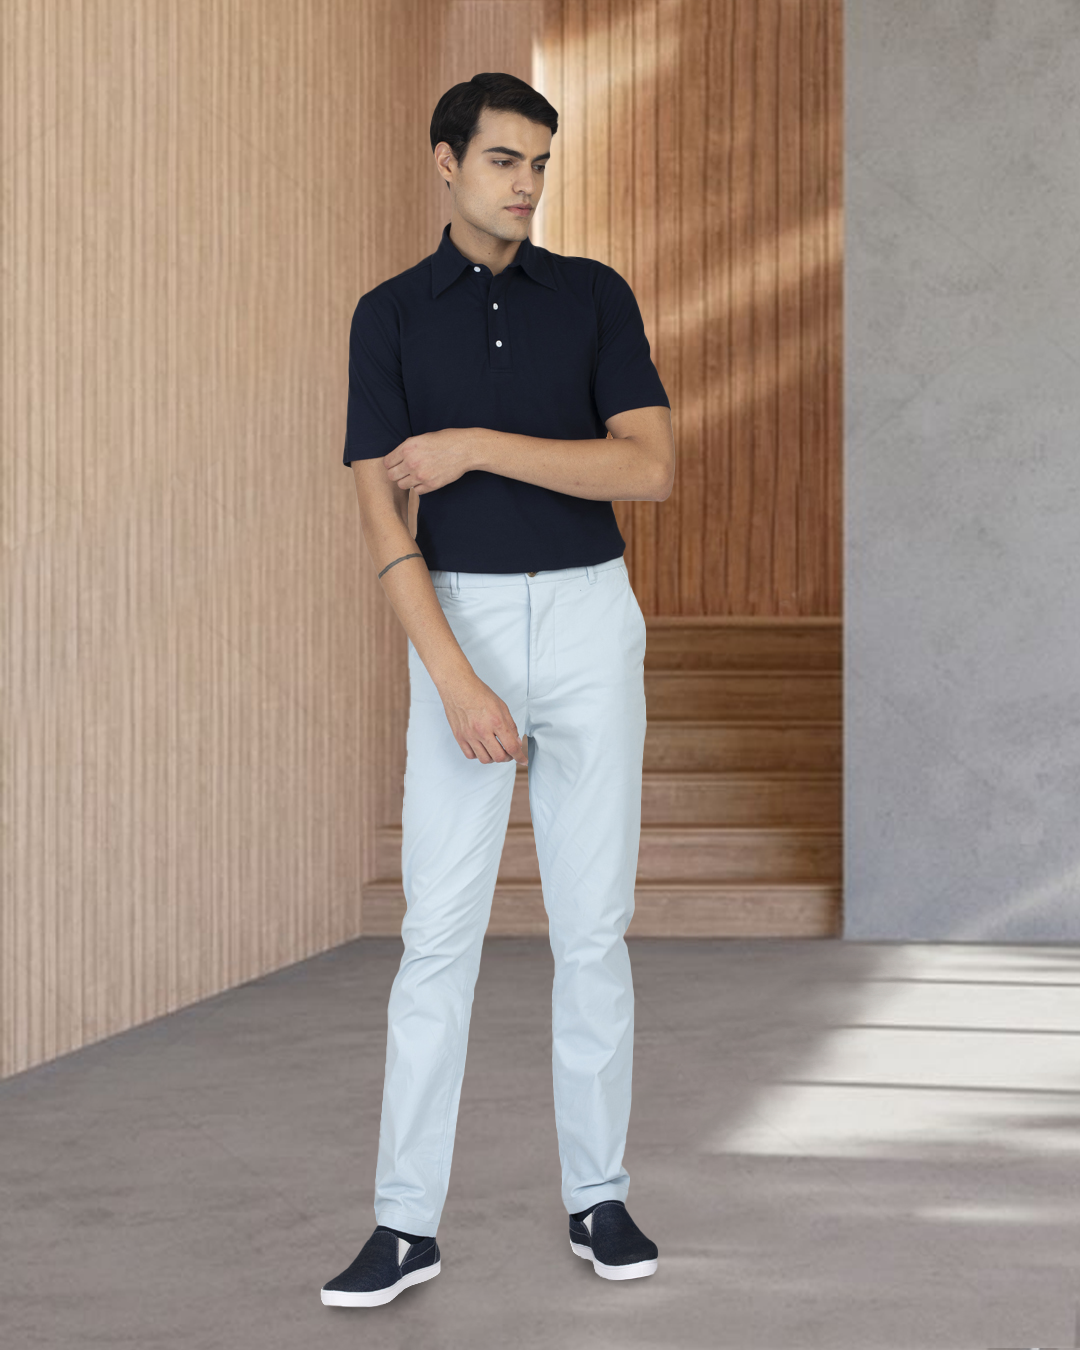 Model wearing custom Genoa Chino pants for men by Luxire in powder blue one hand down one up